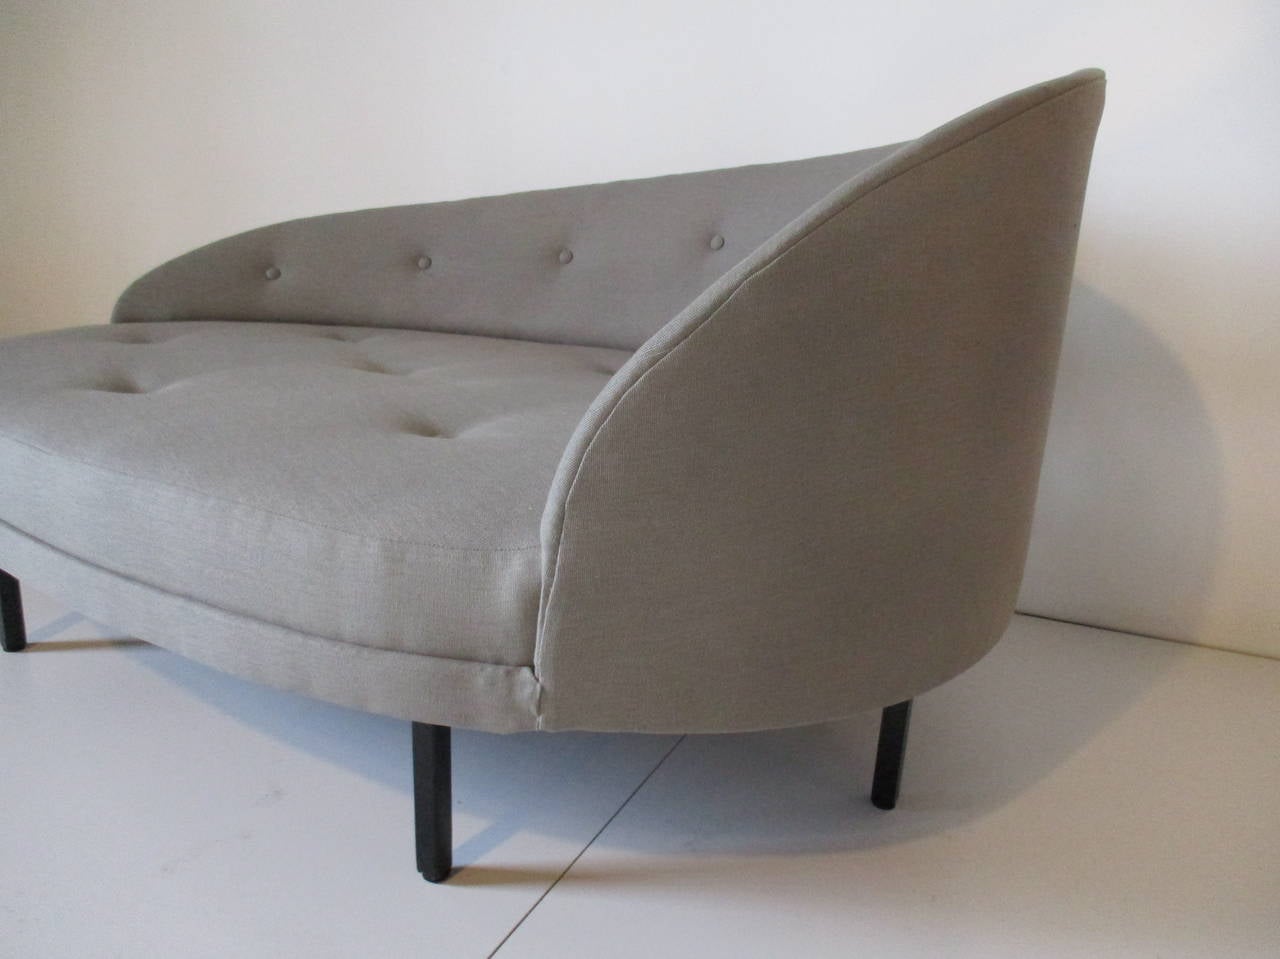 A sculptural chaise longue chair upholstered in a gray, taupe toned linen with satin black boxed metal legs, button tufted back and bottom.